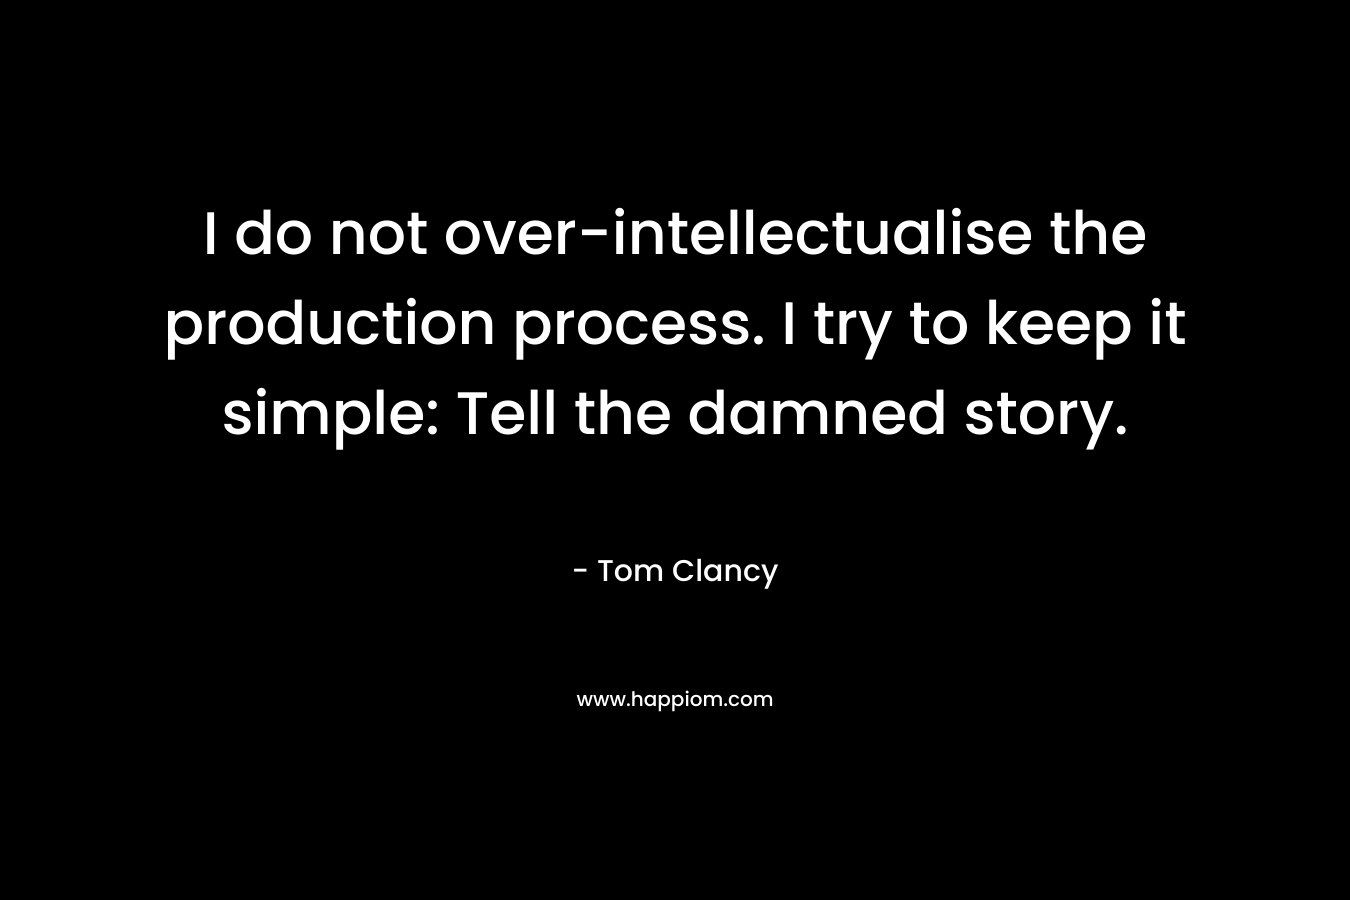 I do not over-intellectualise the production process. I try to keep it simple: Tell the damned story. – Tom Clancy